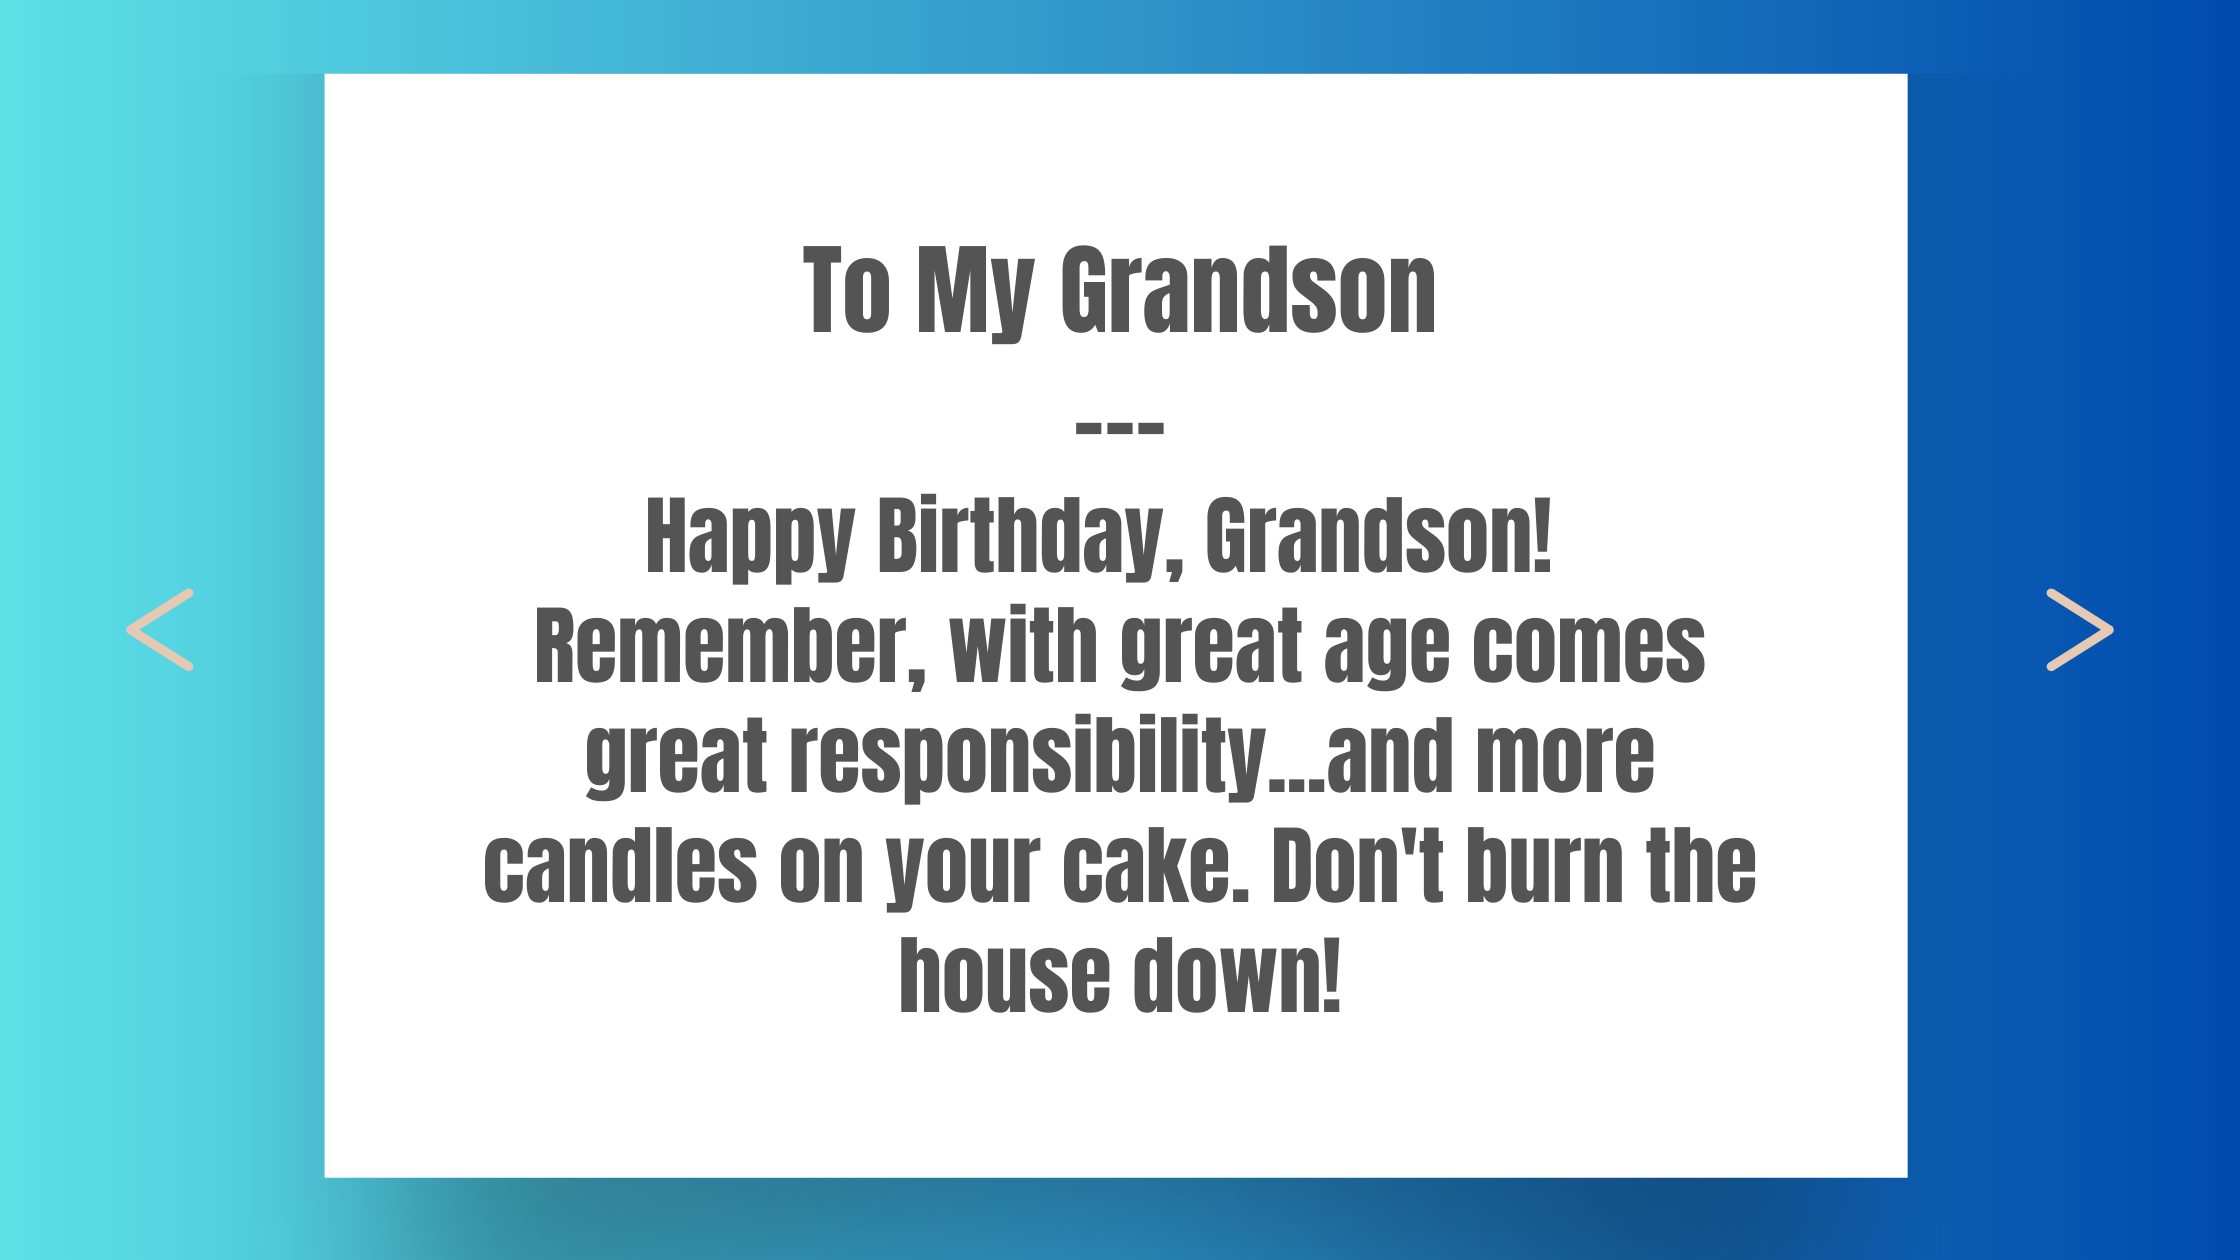 10 Hilarious Birthday Wishes for Your Grandson to Make His Day Unforgettable 🎉🎈 (May 10, 2023)